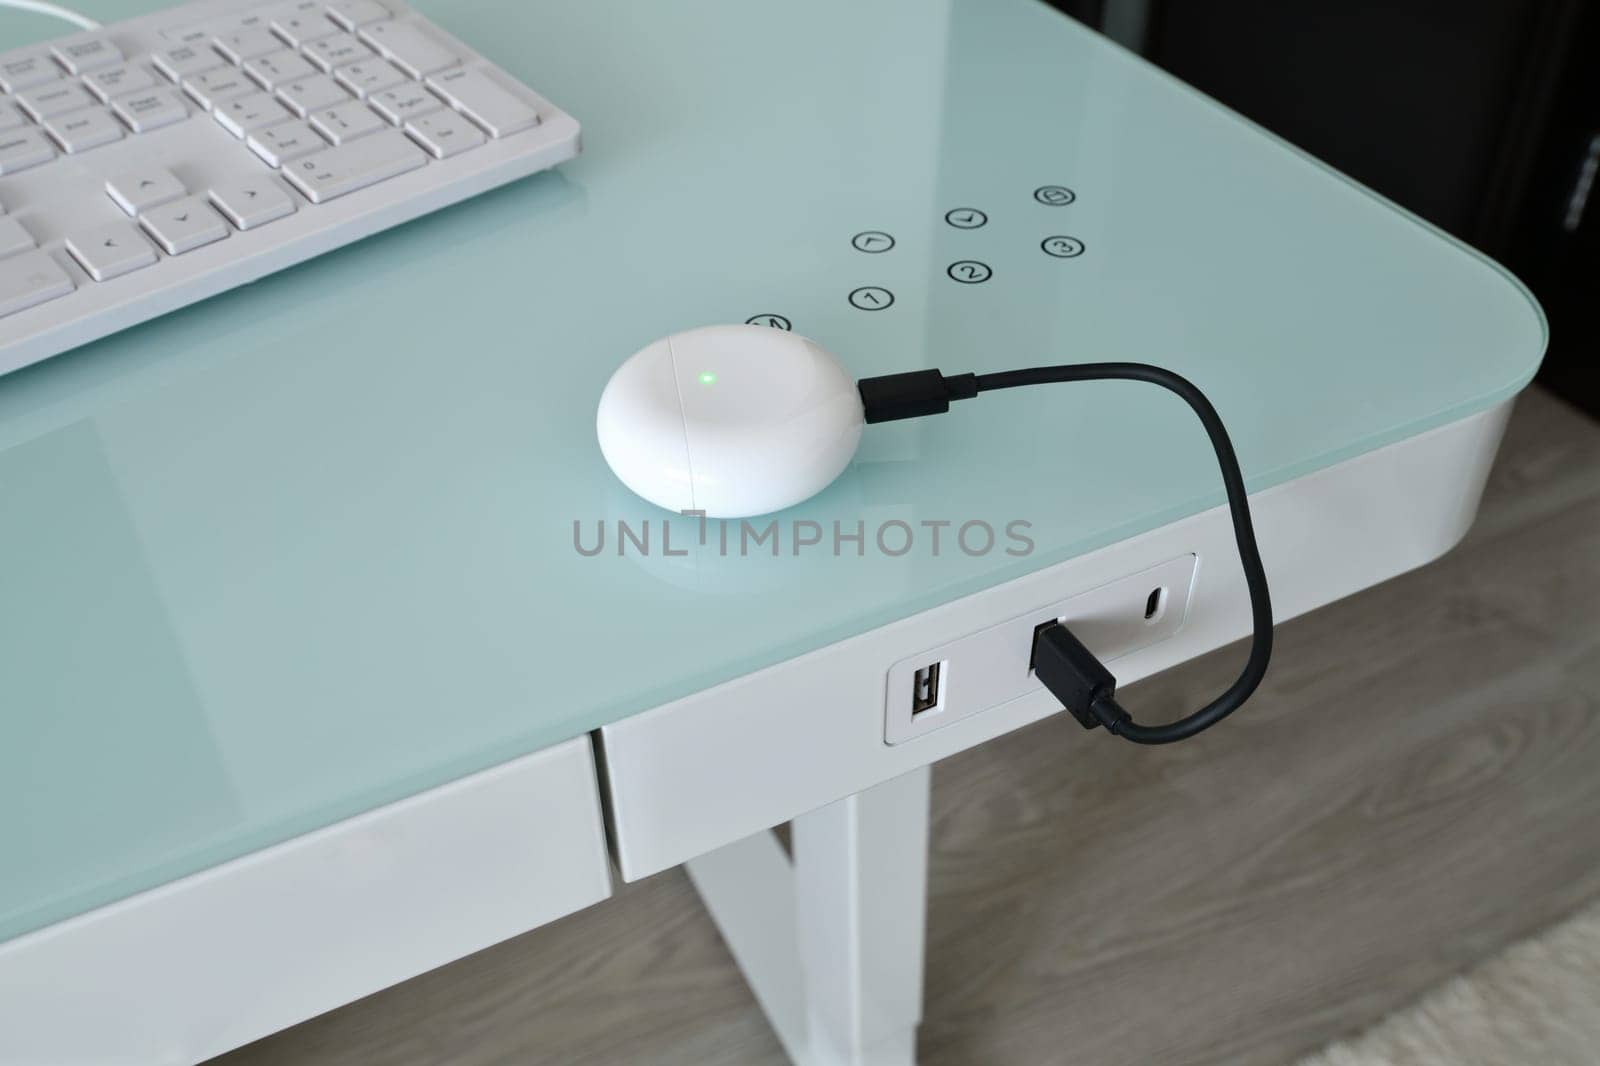 Box for wireless headphones is charged from USB table